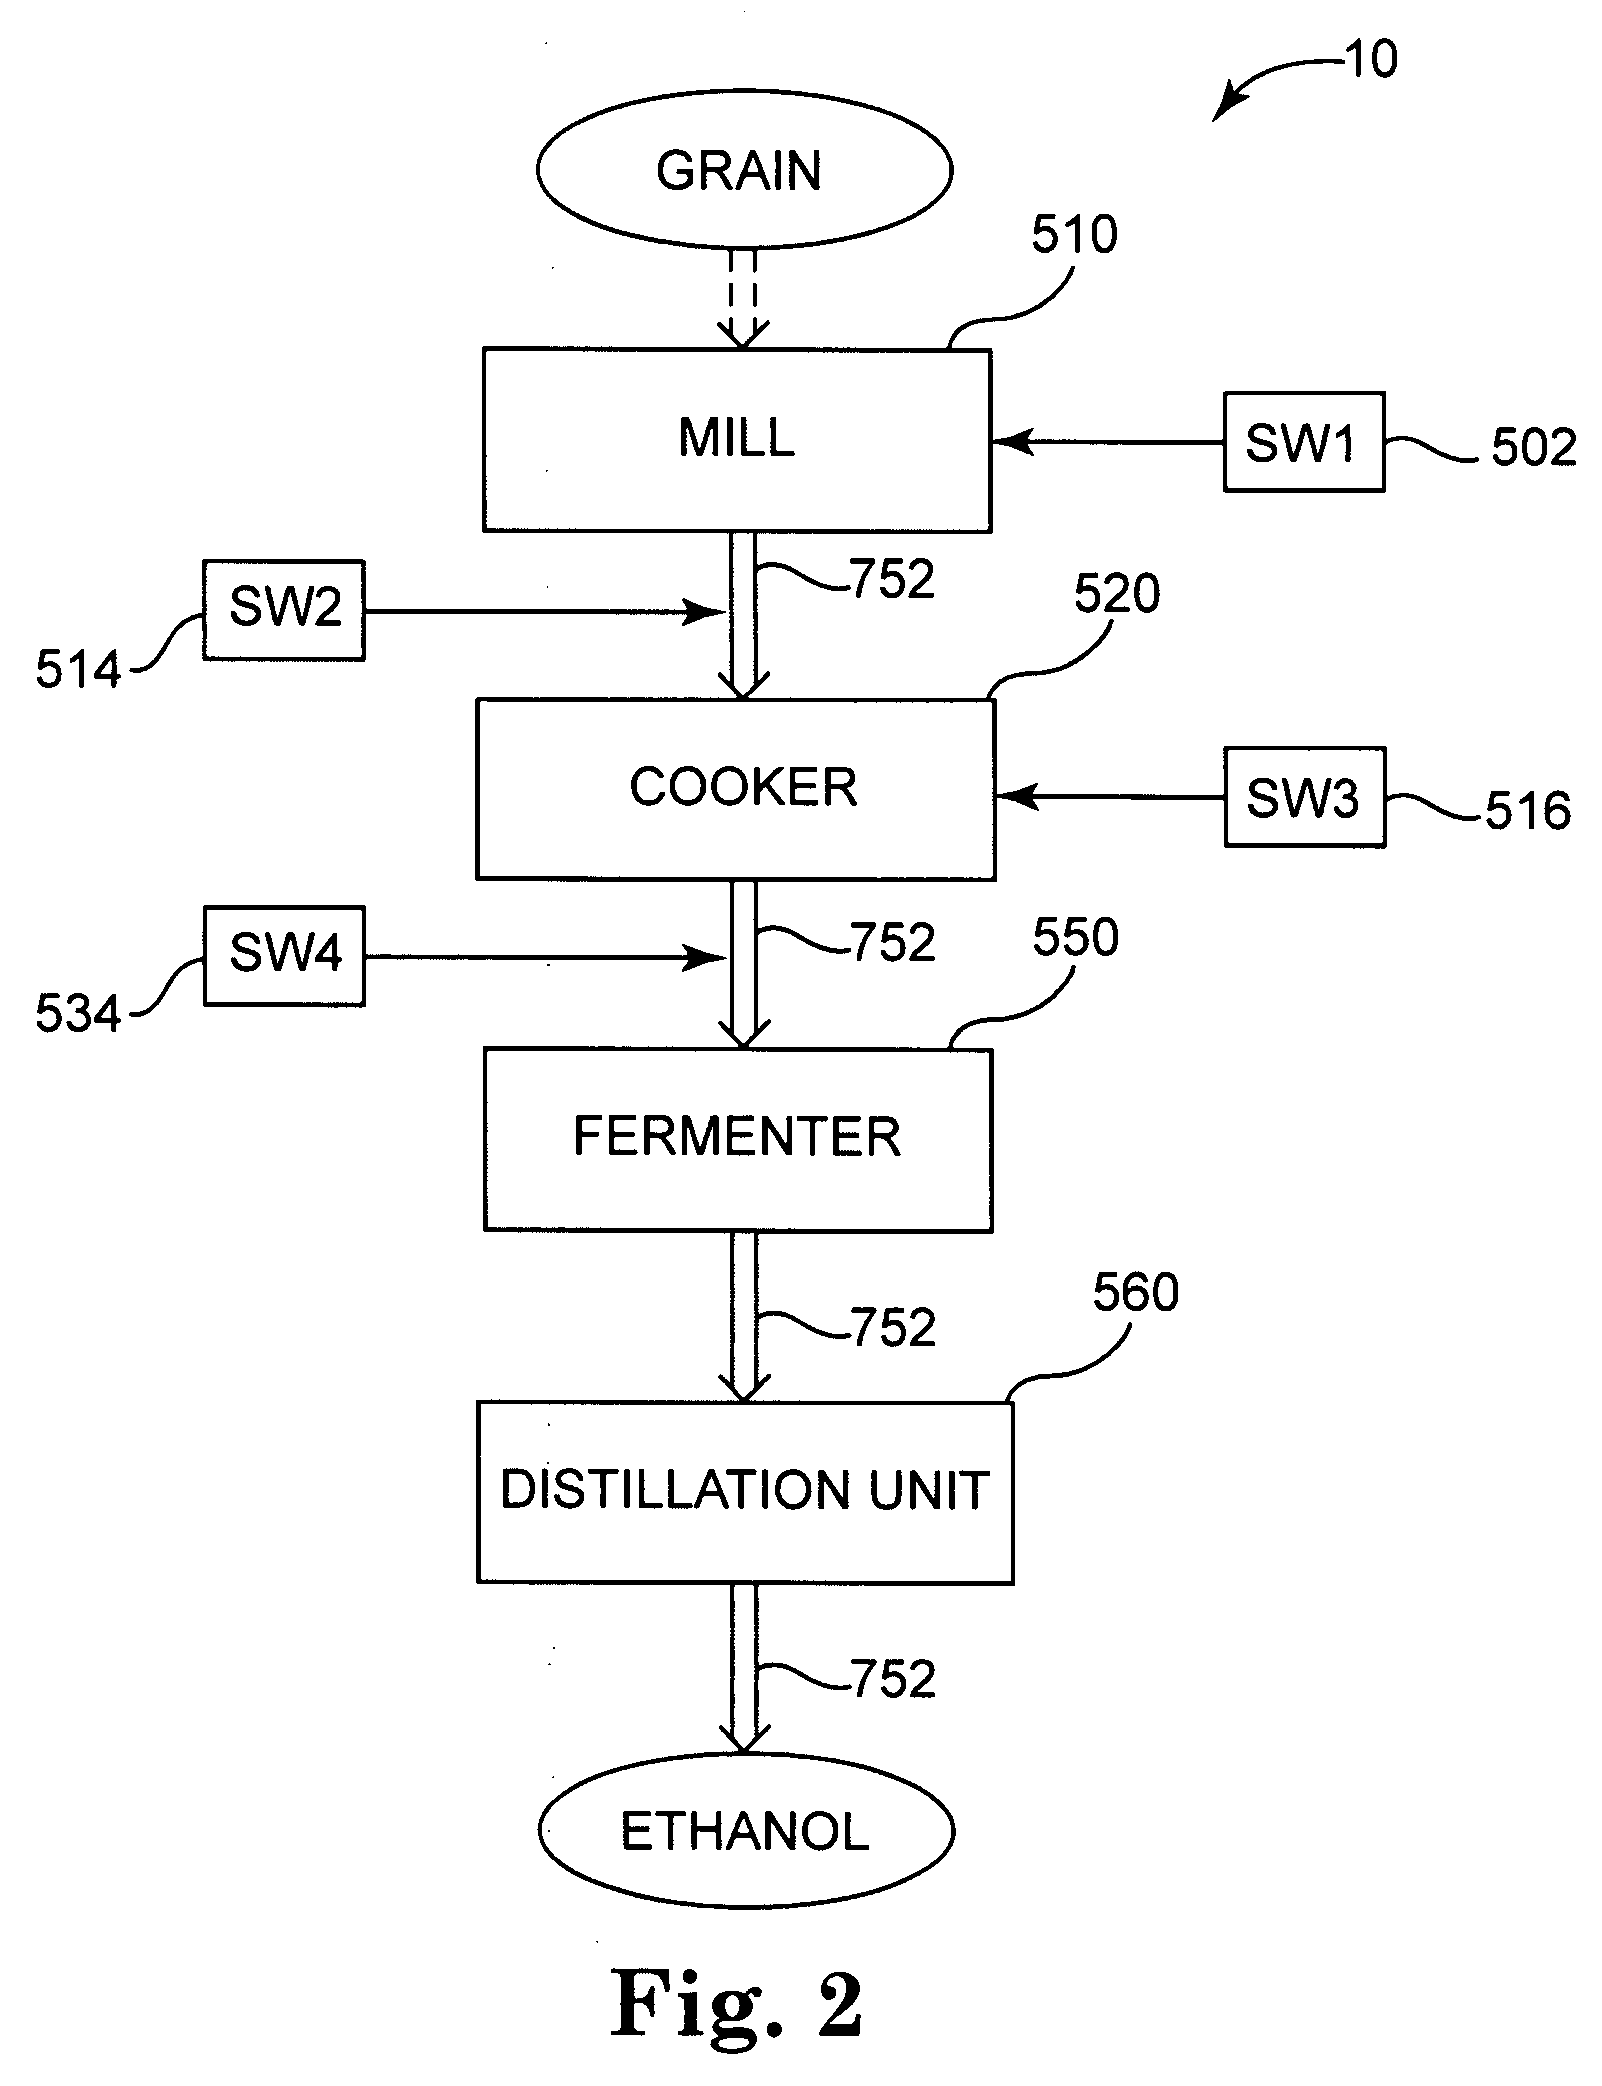 Shock wave apparatus and methods for ethanol production